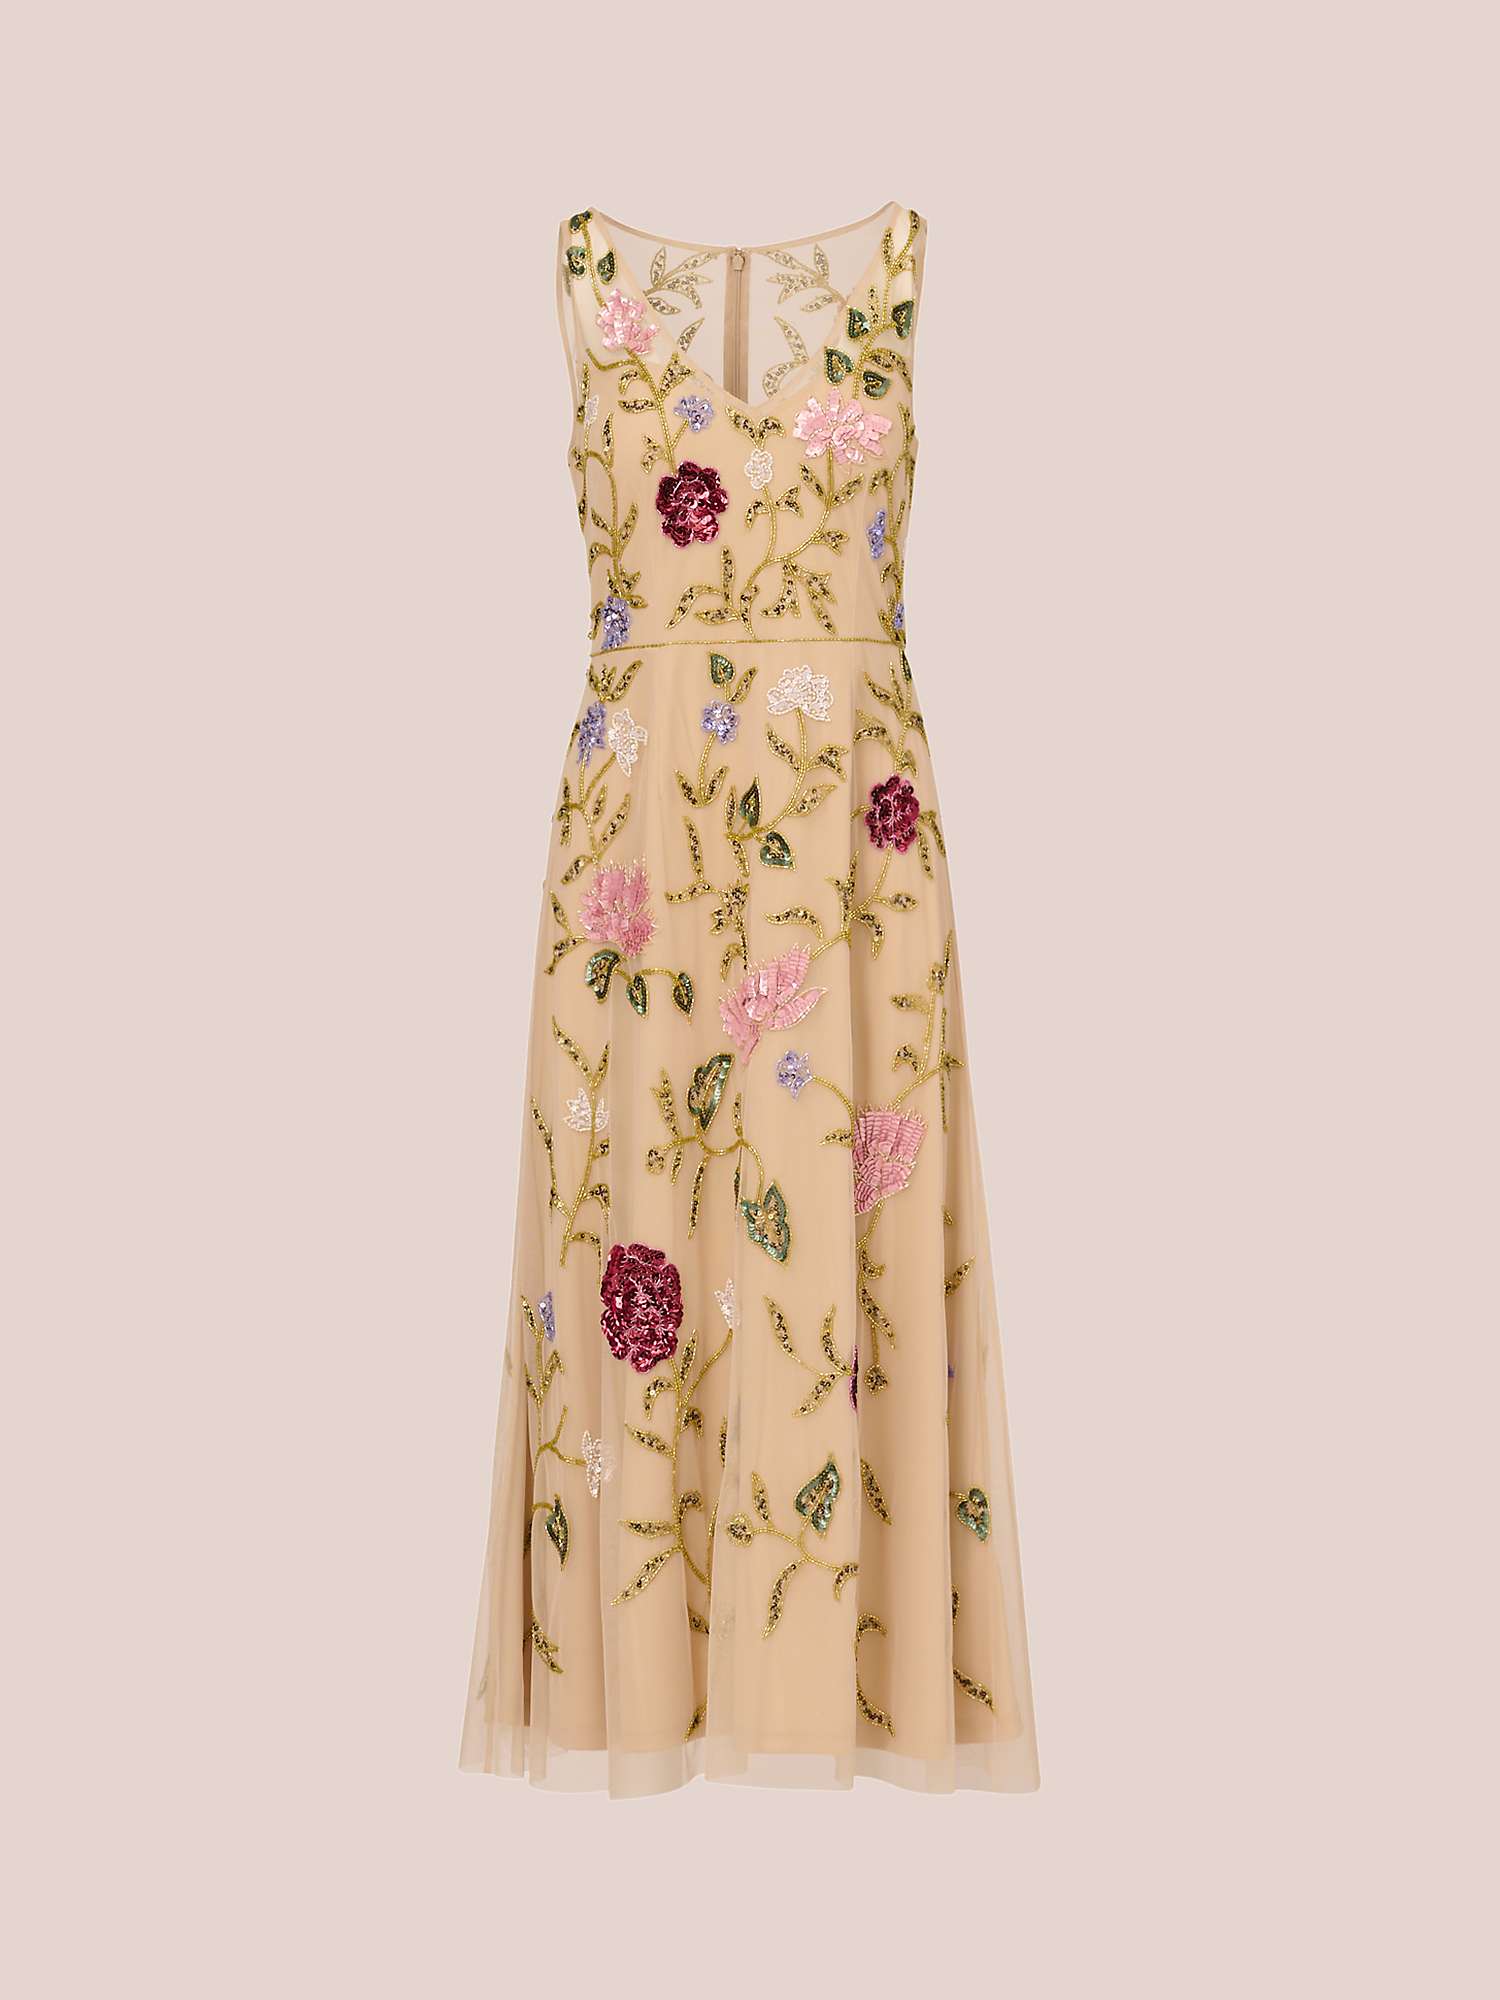 Buy Adrianna Papell Beaded Ankle Length Dress, Light Champagne Online at johnlewis.com